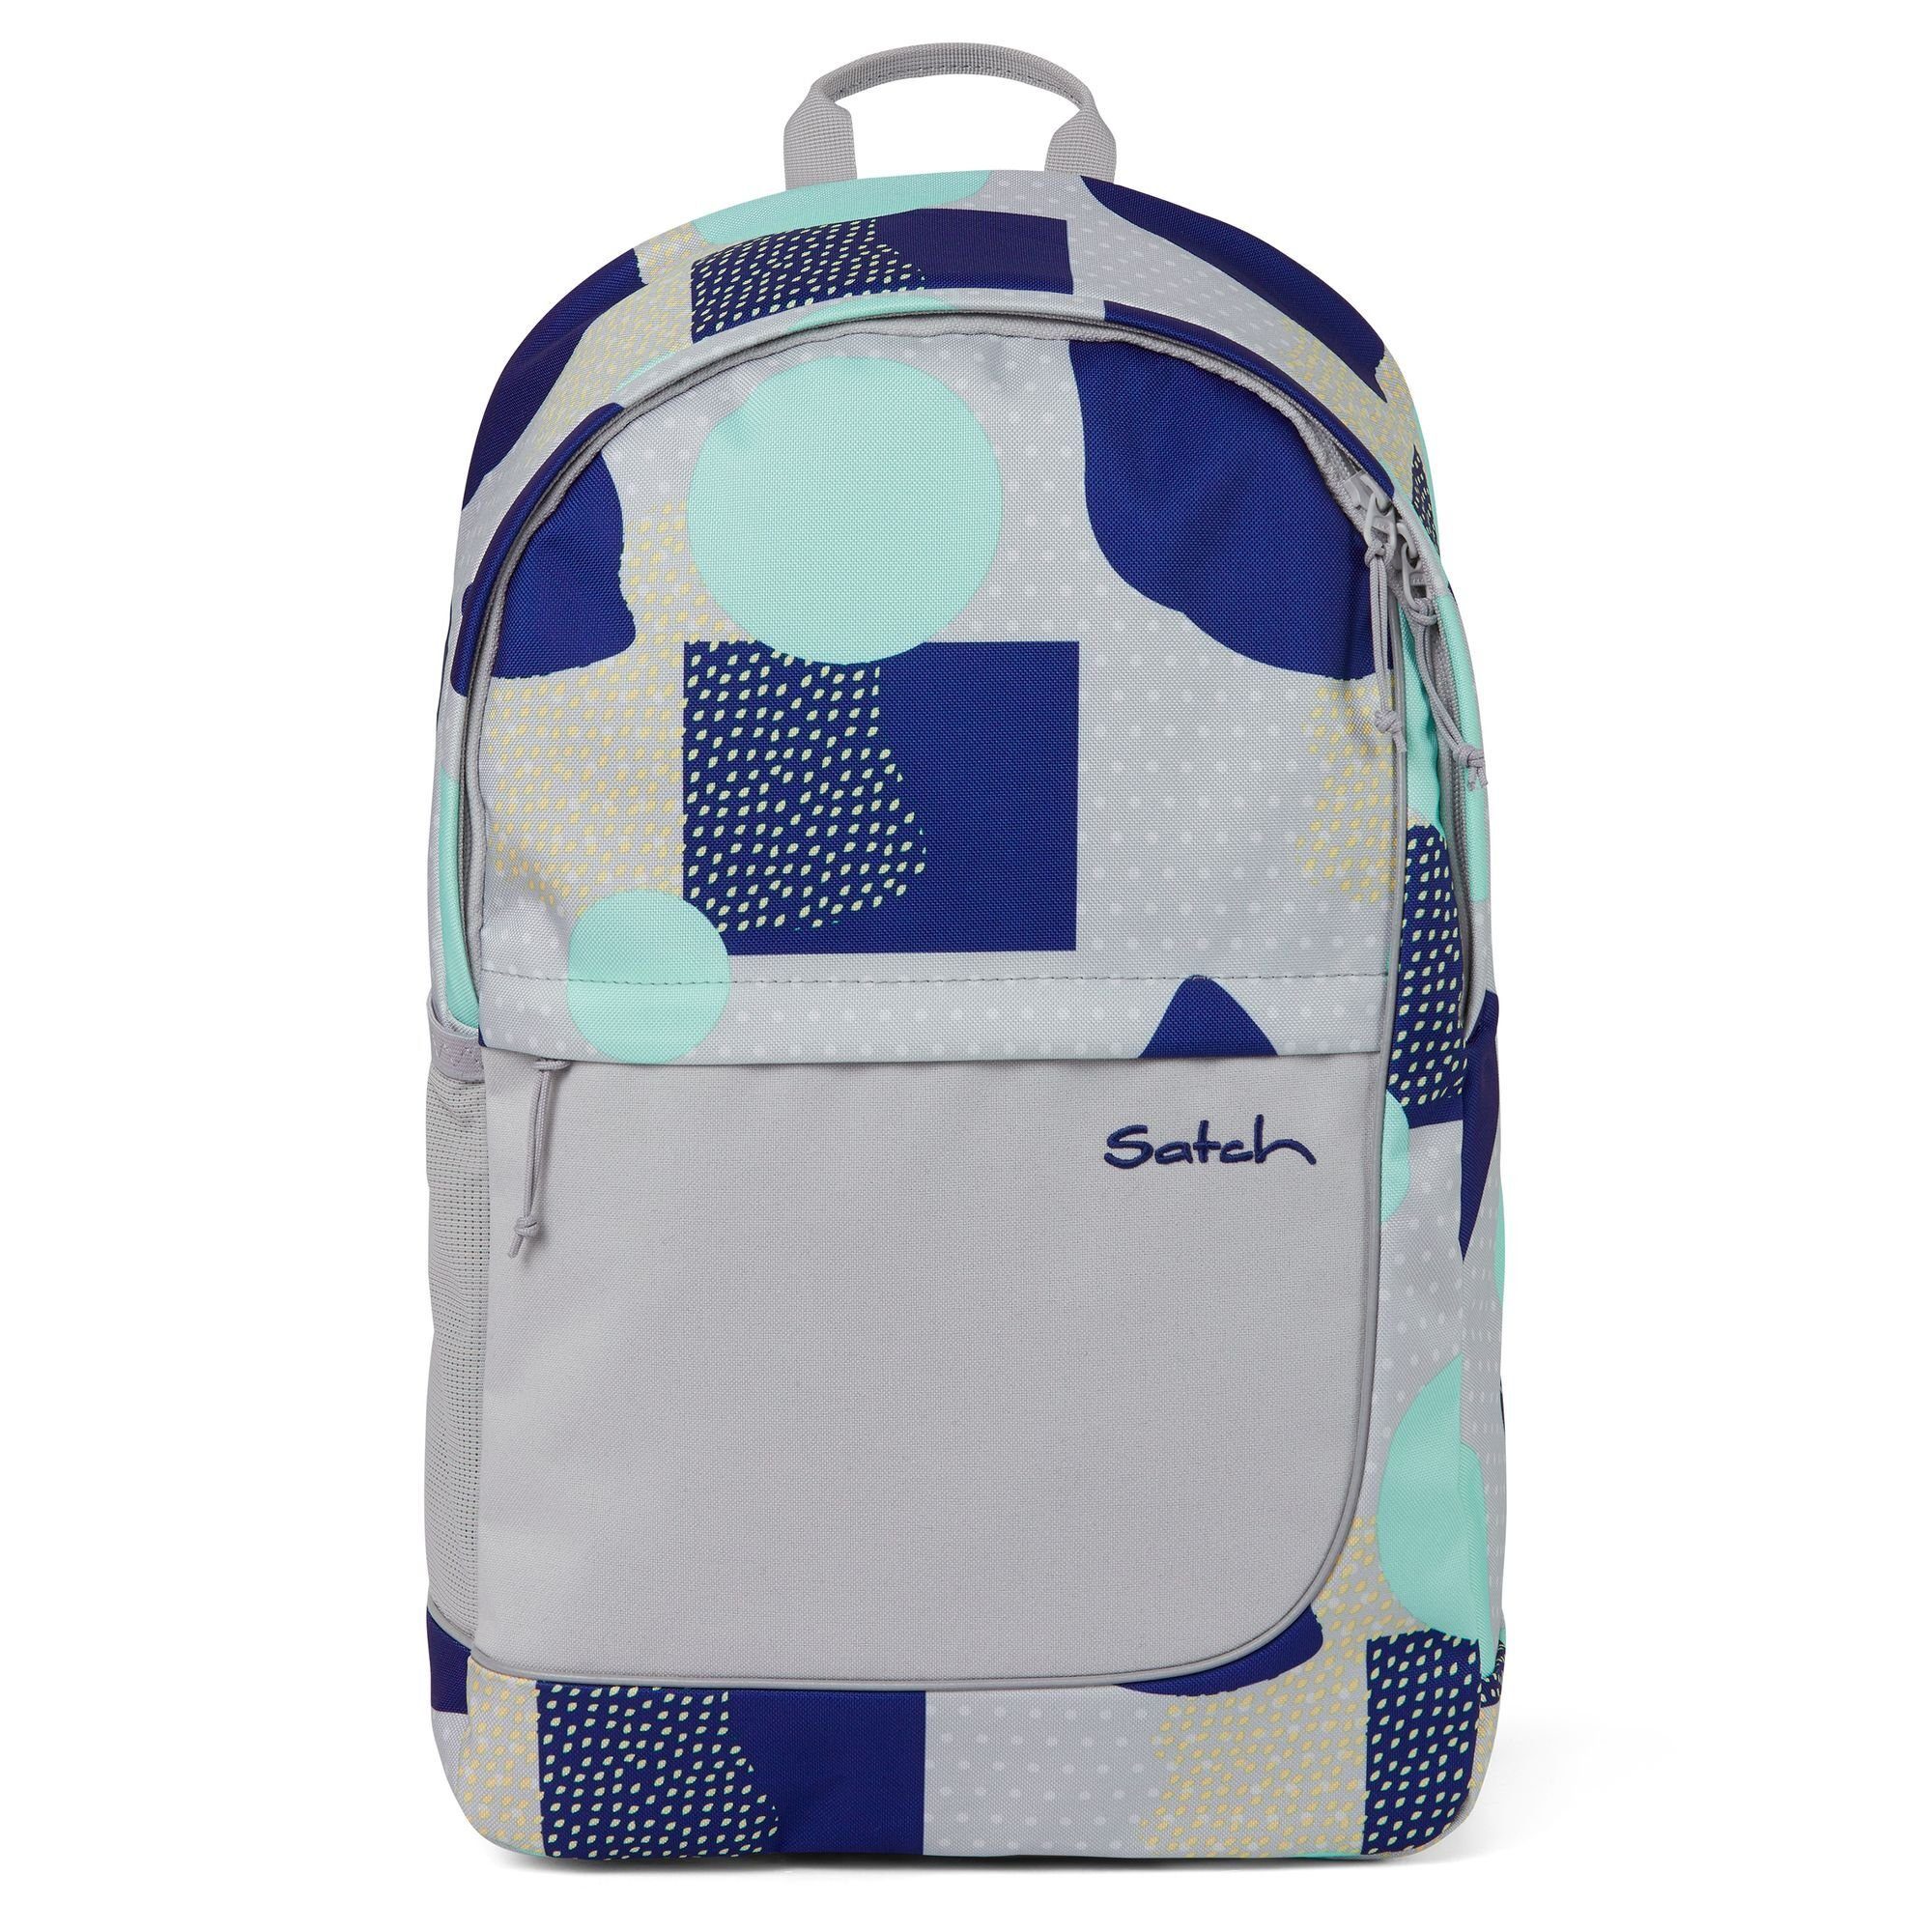 blue fly, turquoise grey PET Satch Daypack